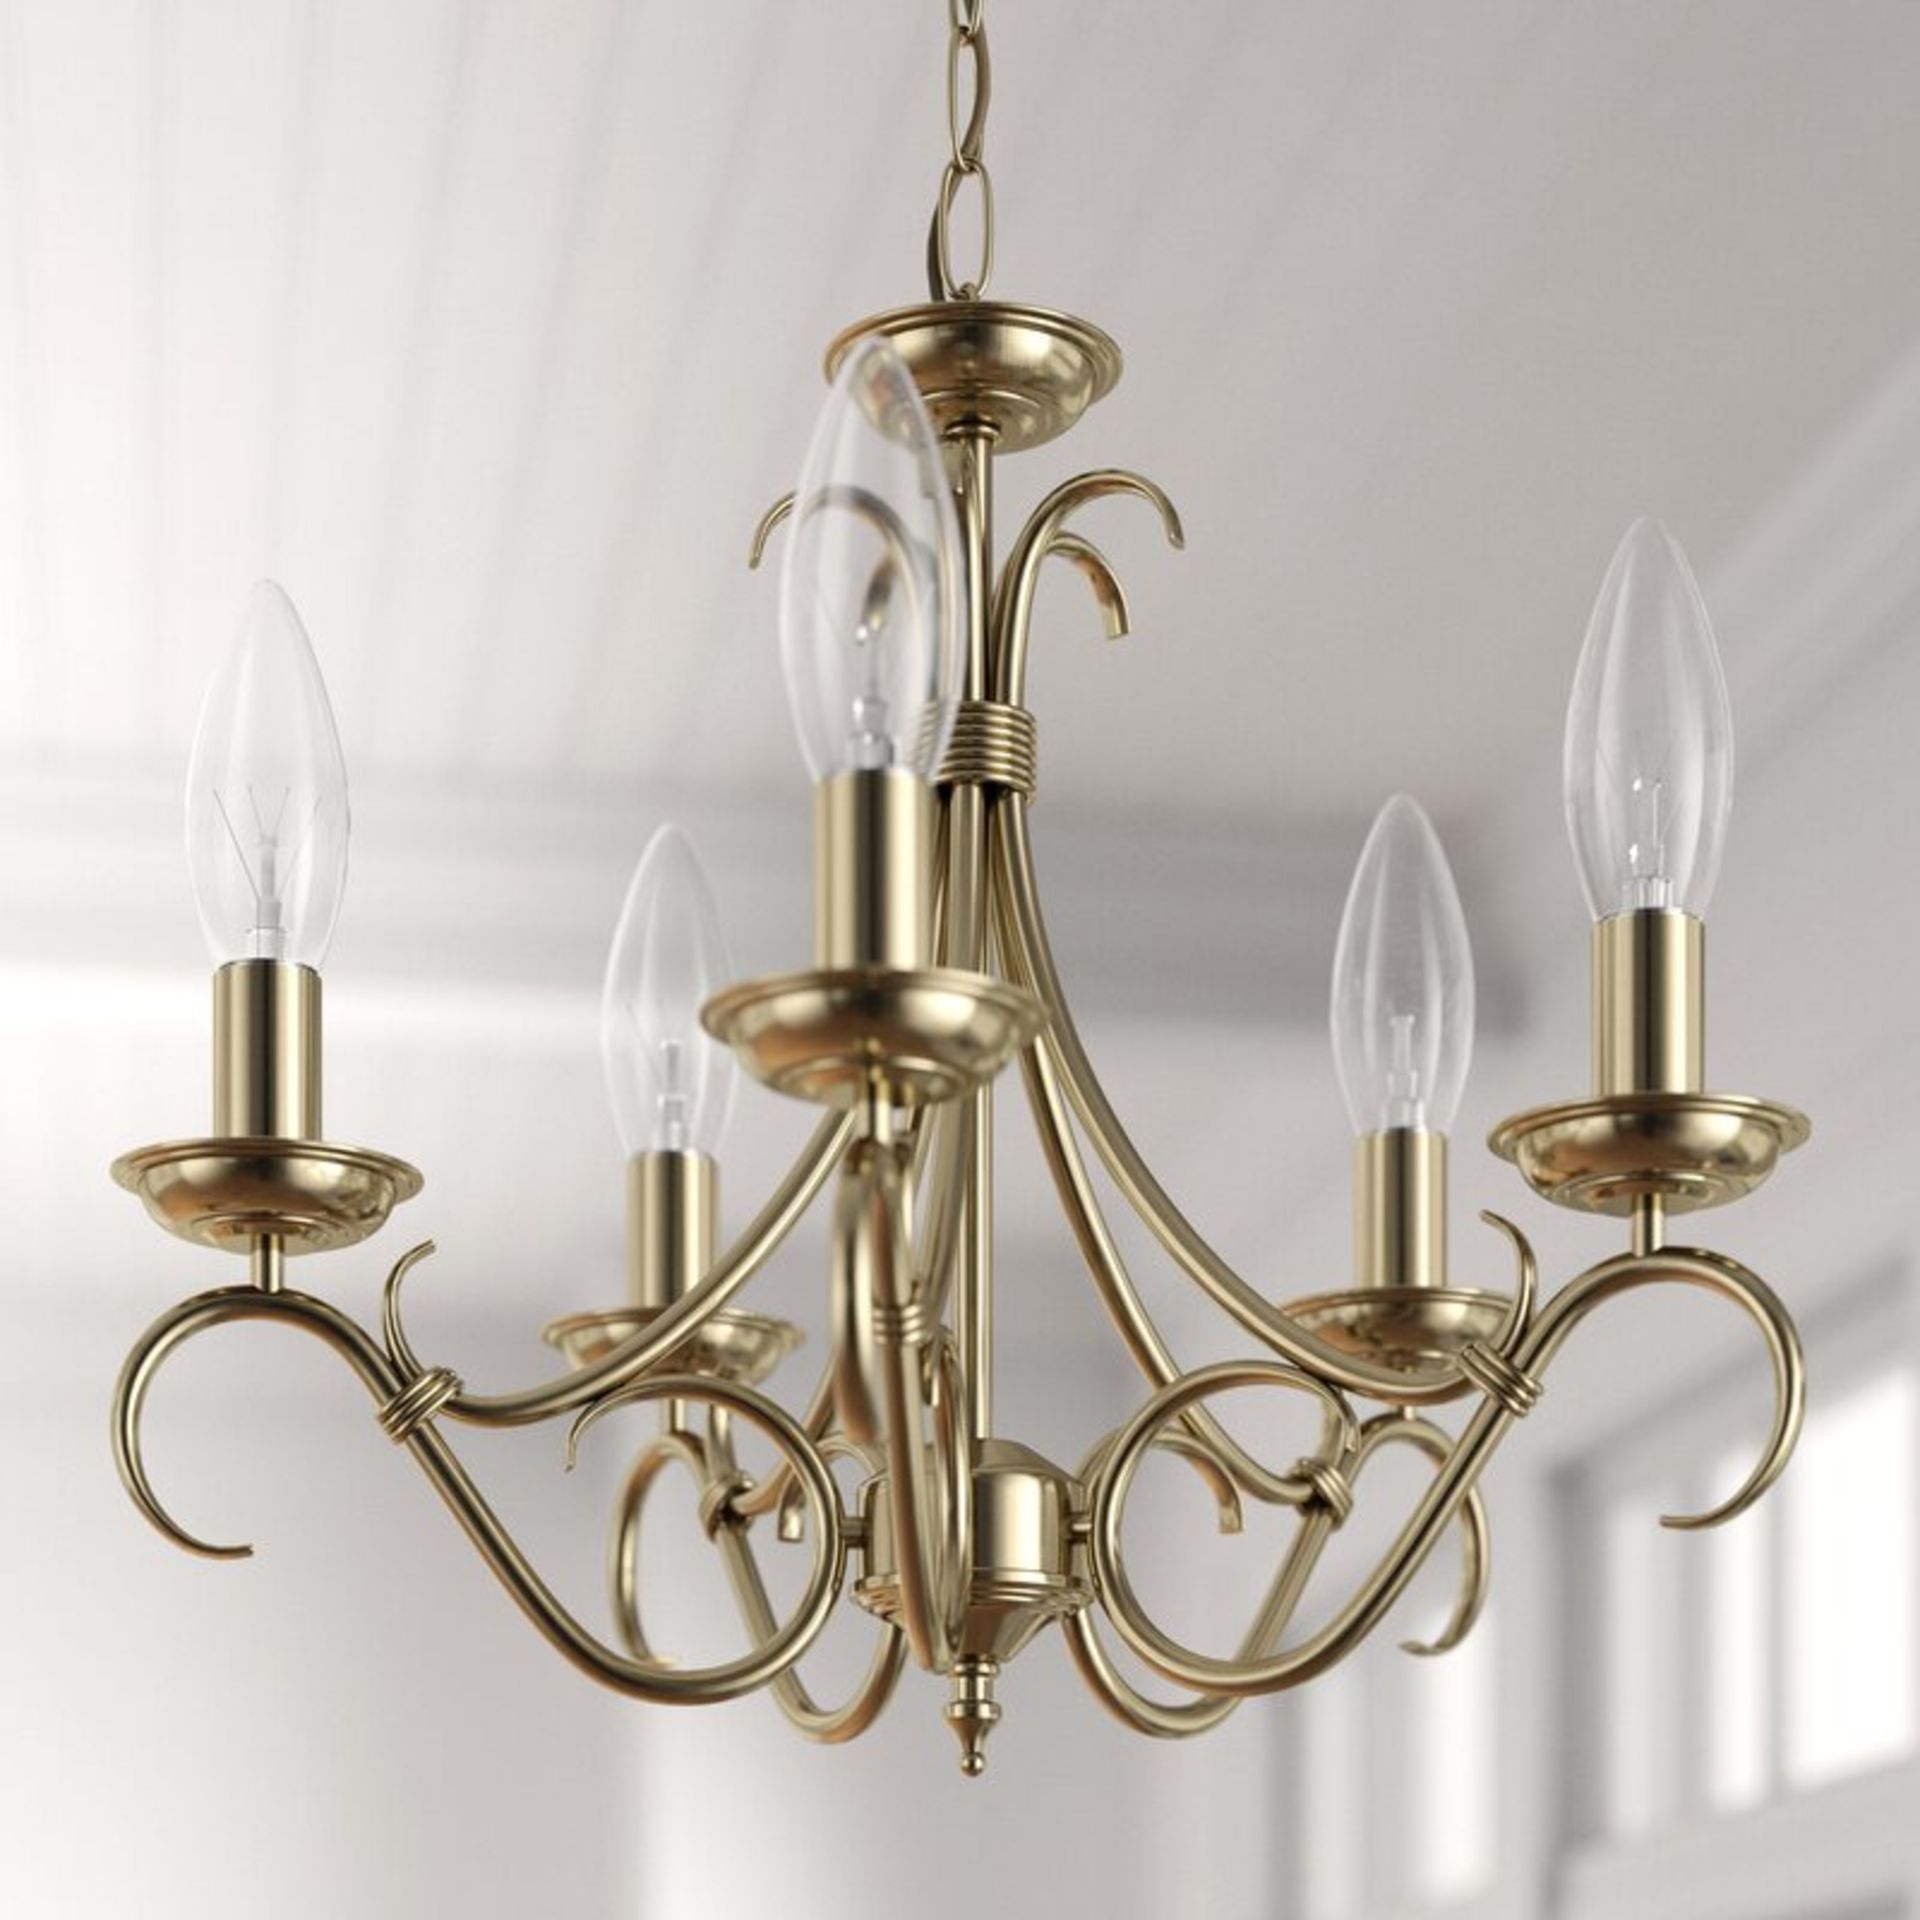 Barney 5-Light Candle Style Chandelier - RRP £132.00. - Image 4 of 4